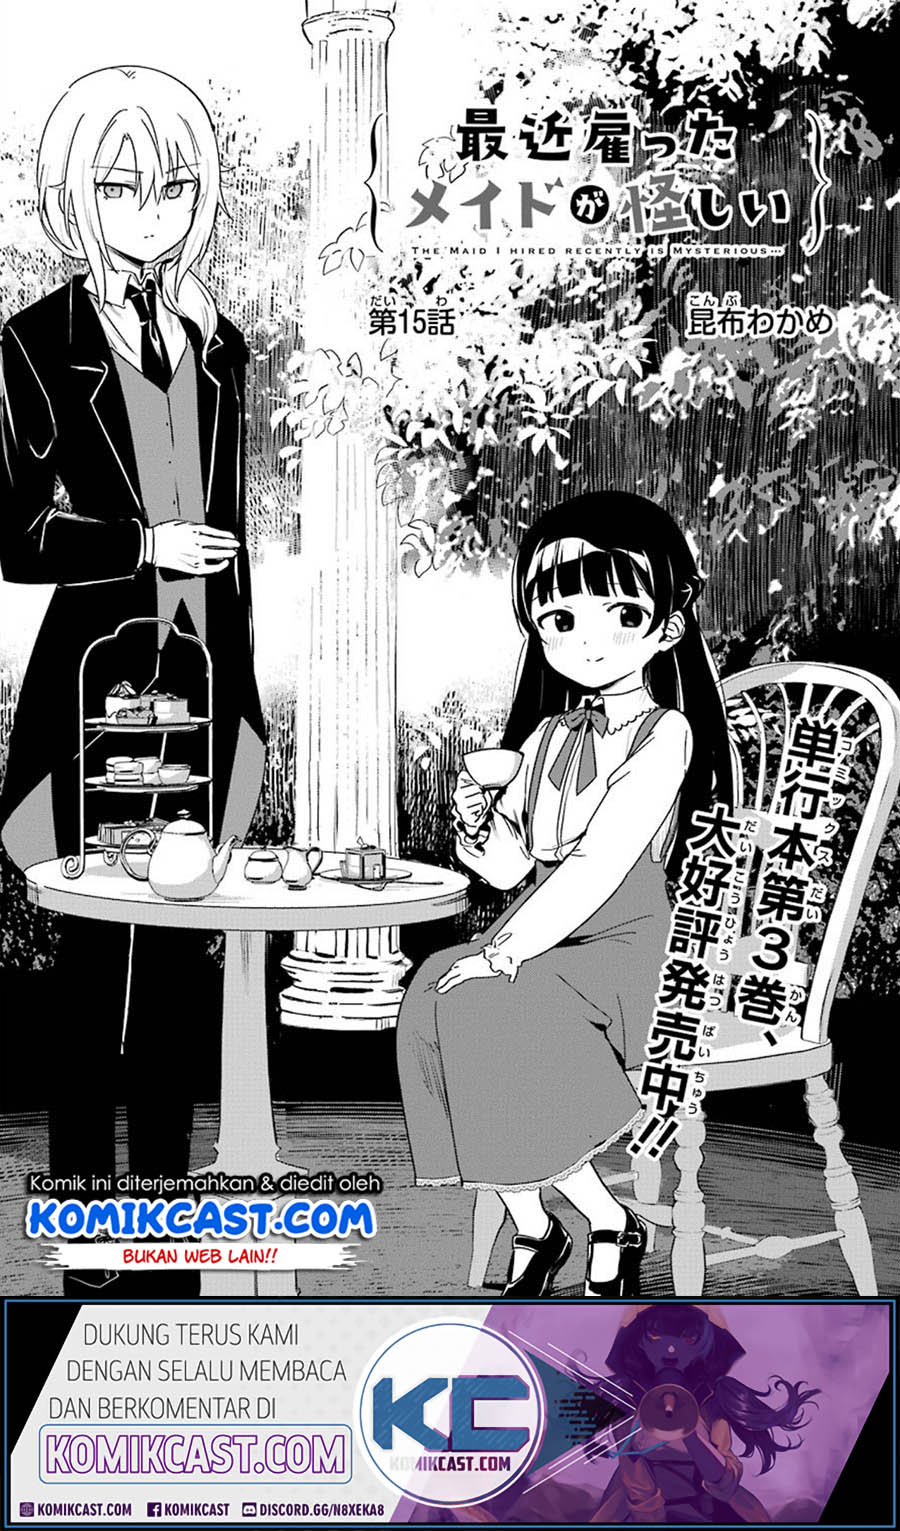 My Recently Hired Maid Is Suspicious Chapter 15 Bahasa Indonesia